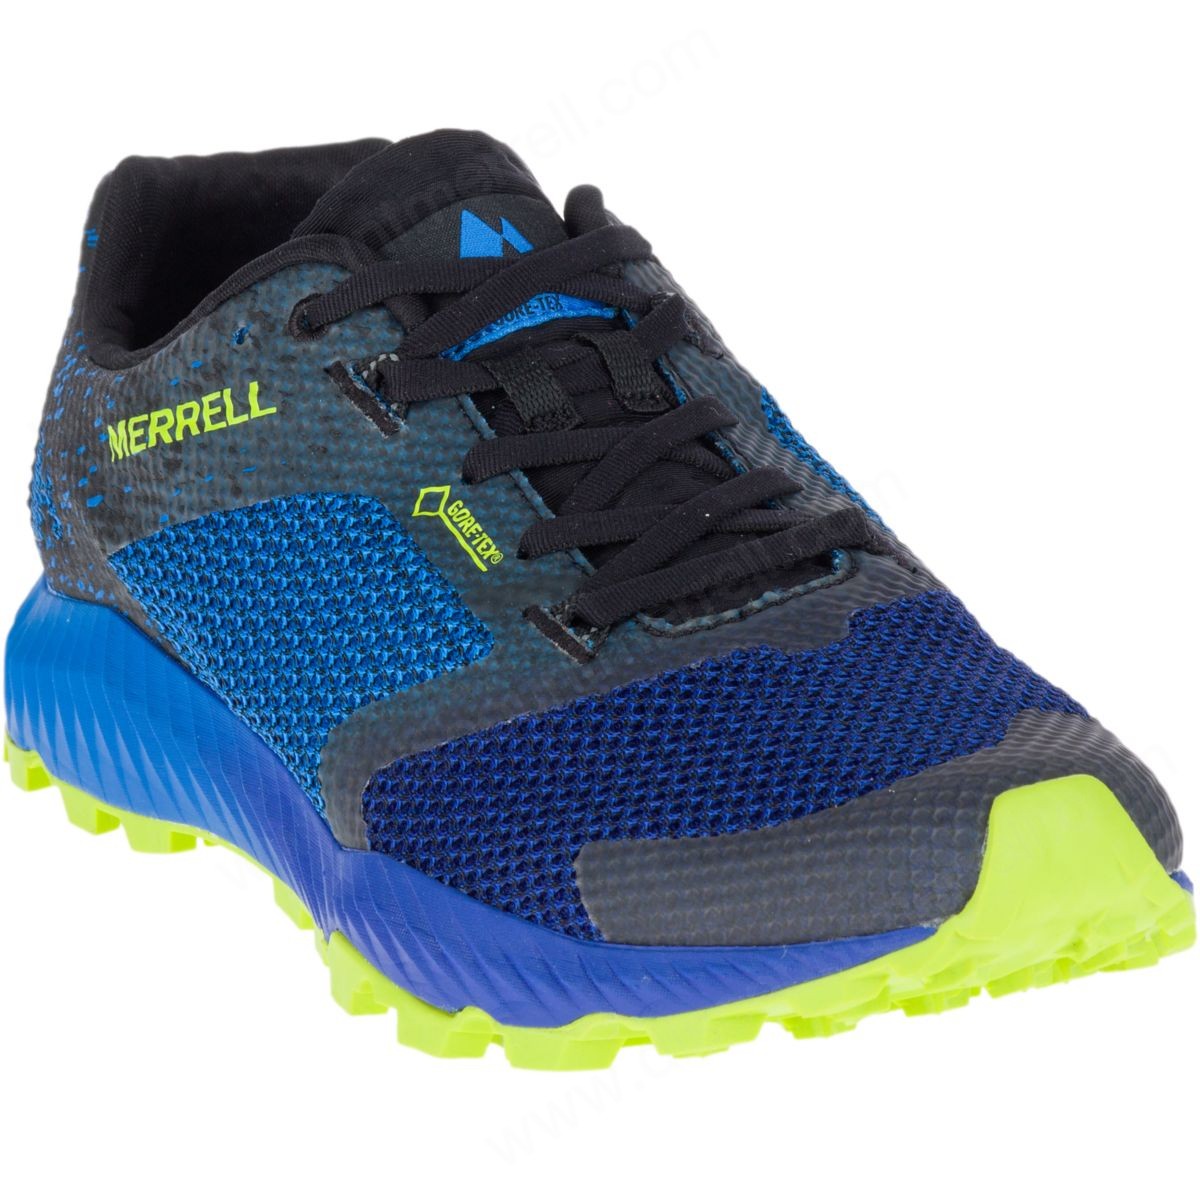 Merrell Man's All Out Crush Gore-Tex® Blueberry - -3